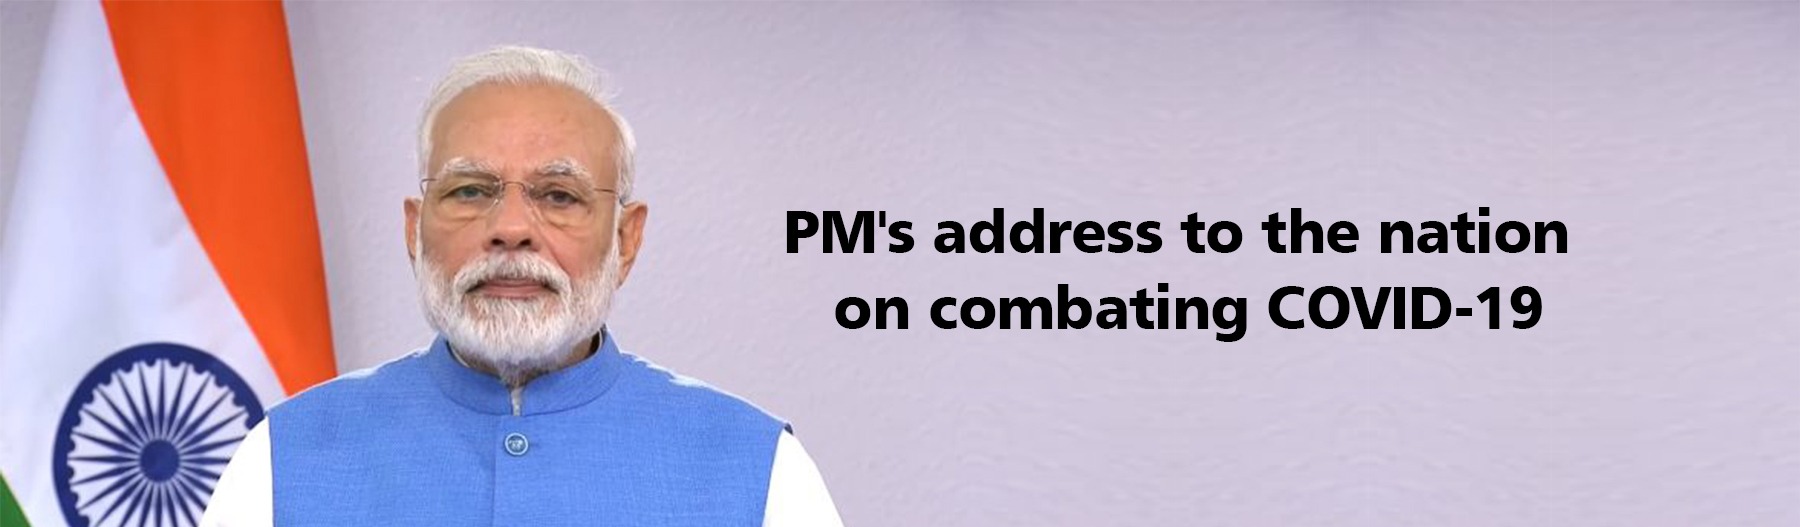 PM’s address to the nation on combating COVID-19